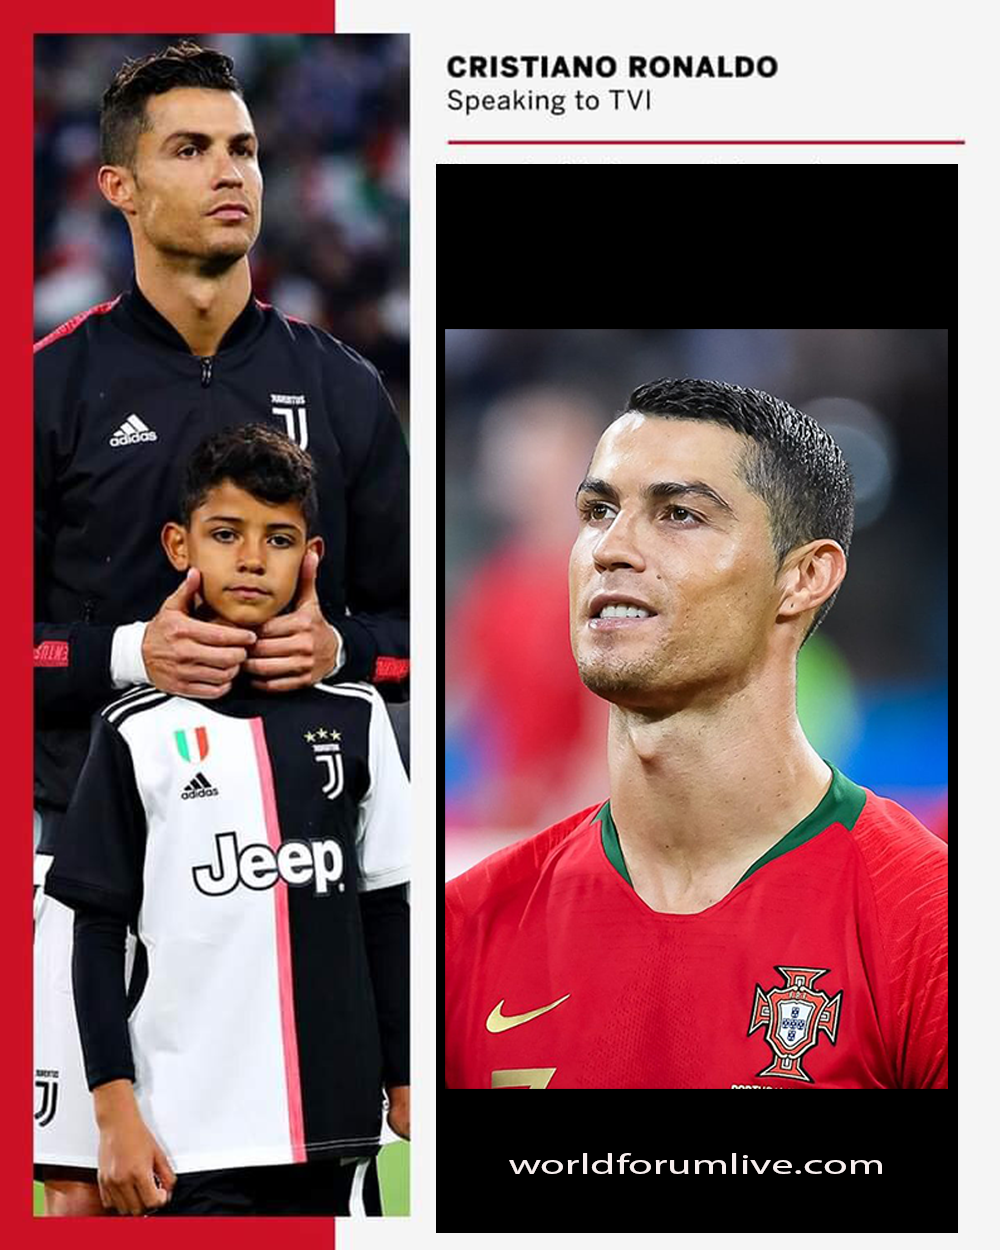 Cristiano-Ronaldo-Speaking-To-TV-On-His-Growing-Up-In-Lisbon.png